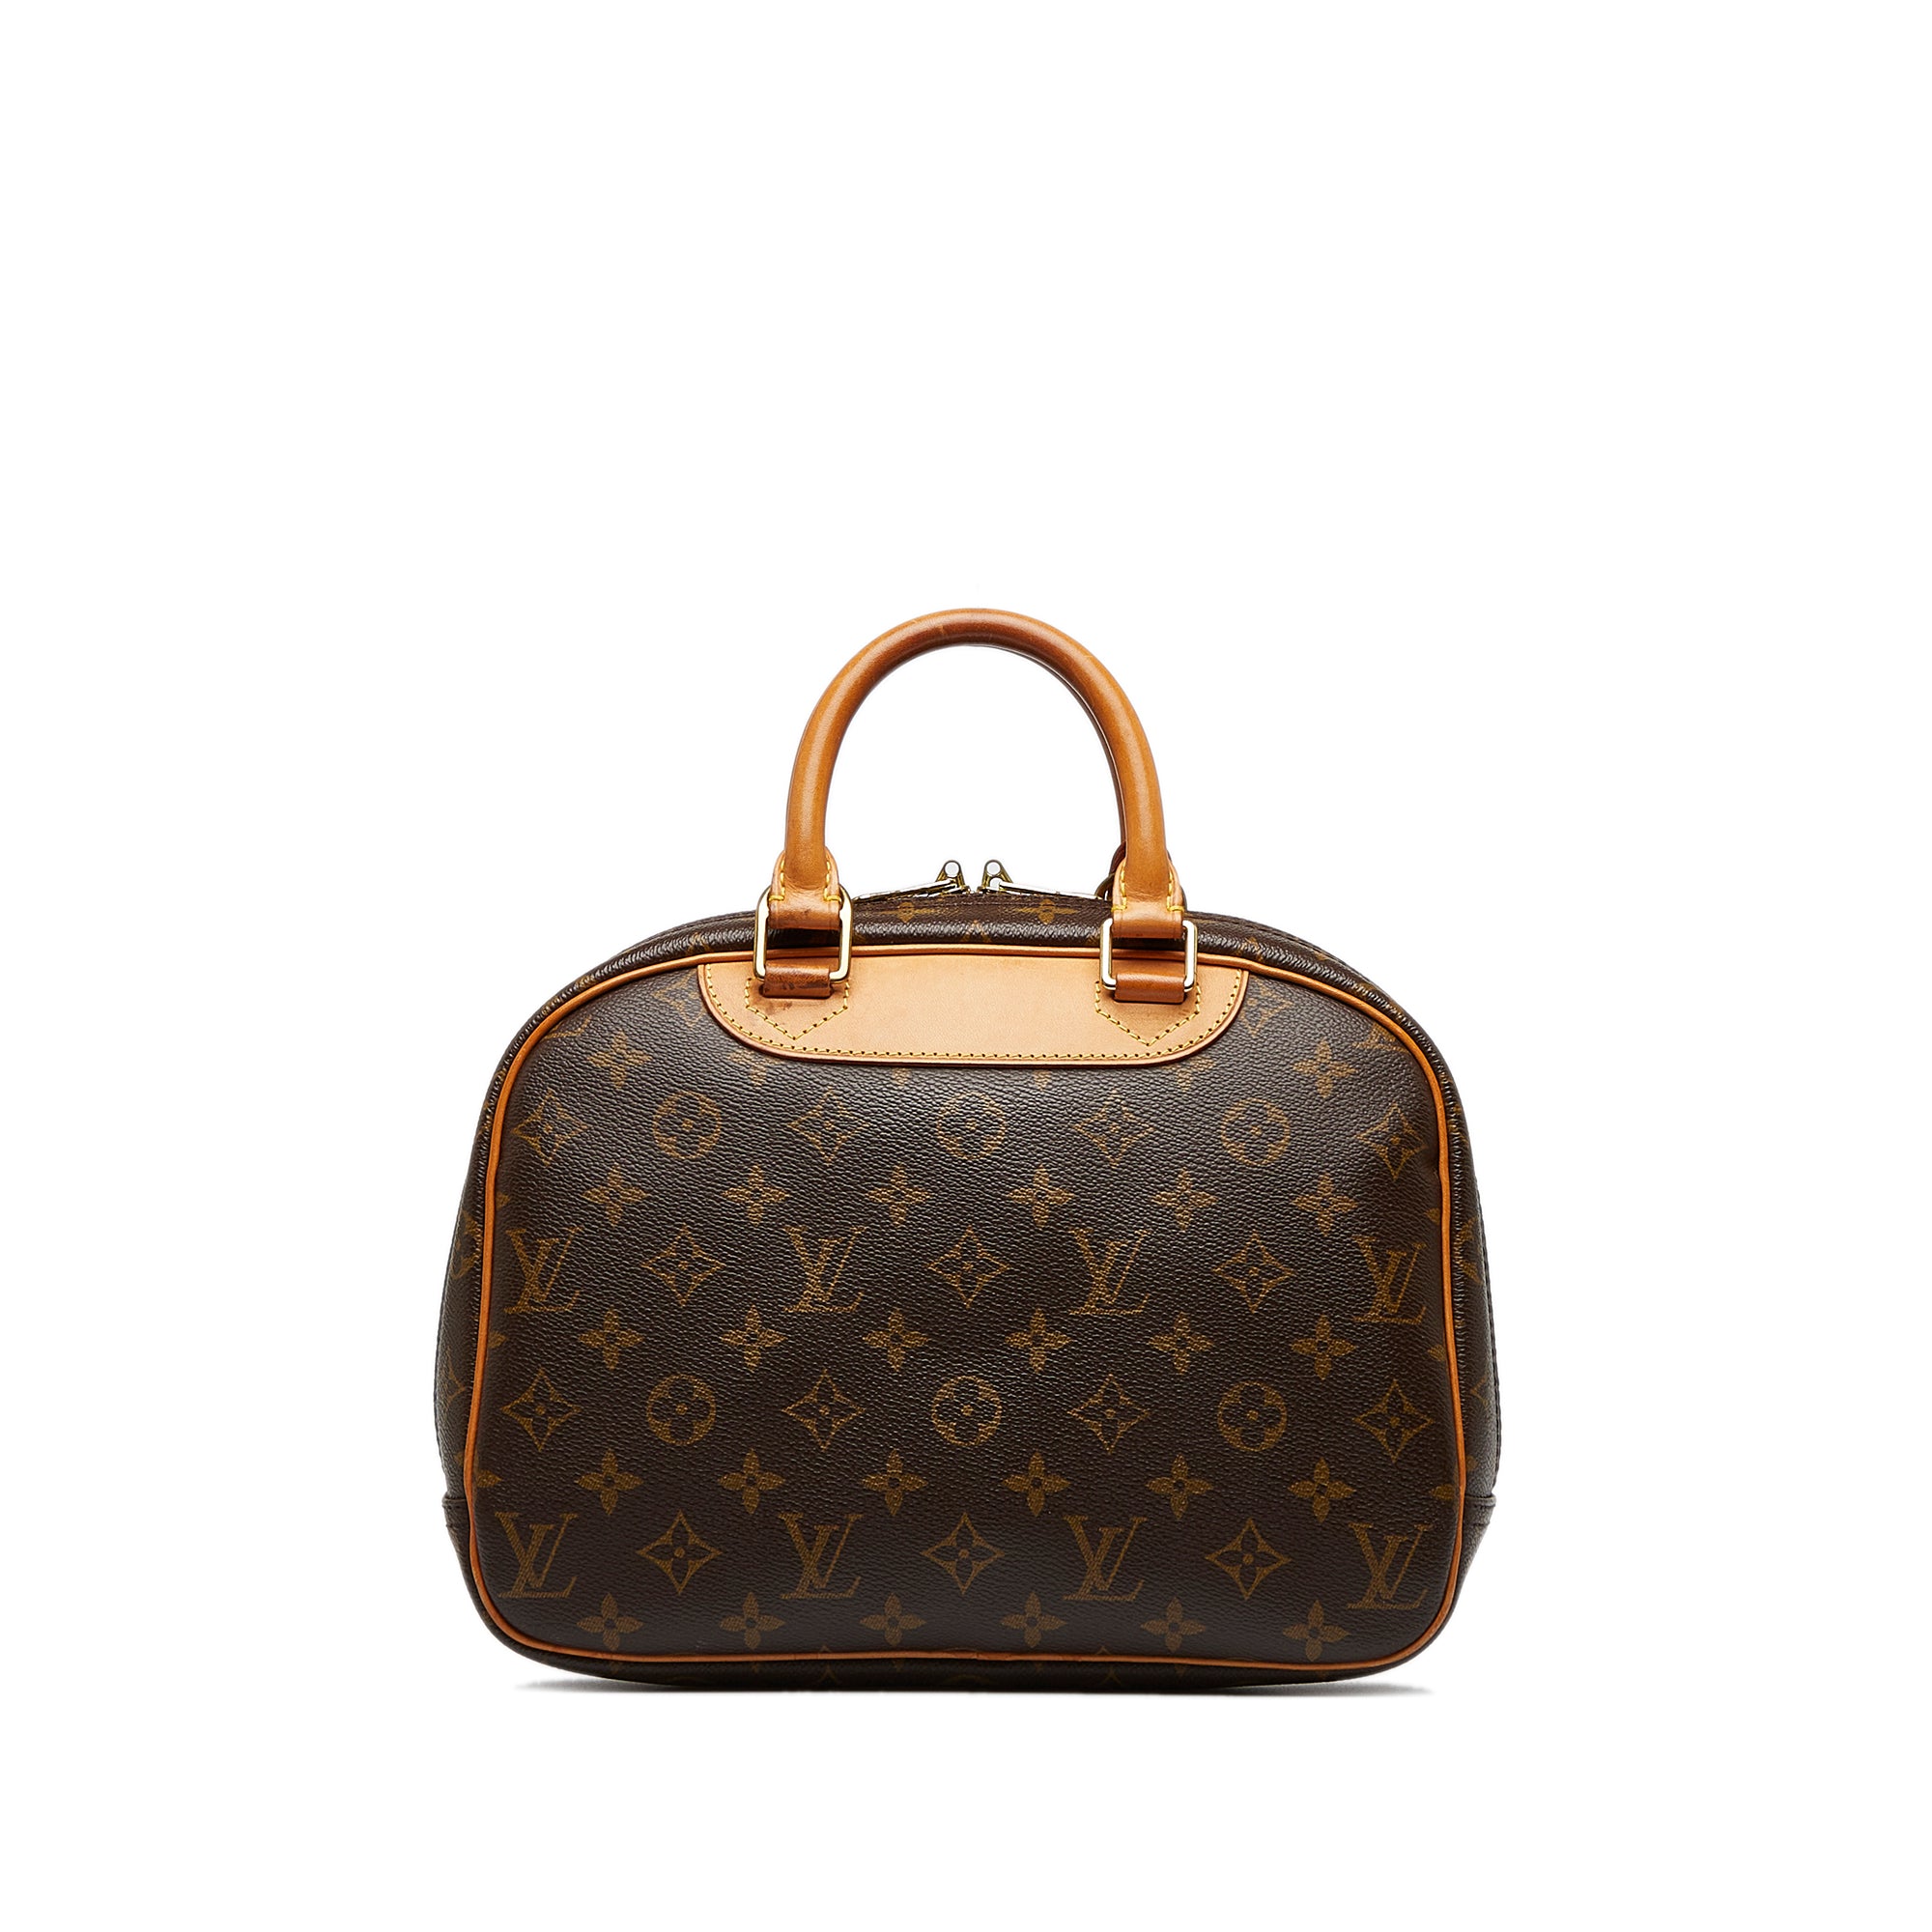 LV Trouville Monogram Handbag - clothing & accessories - by owner